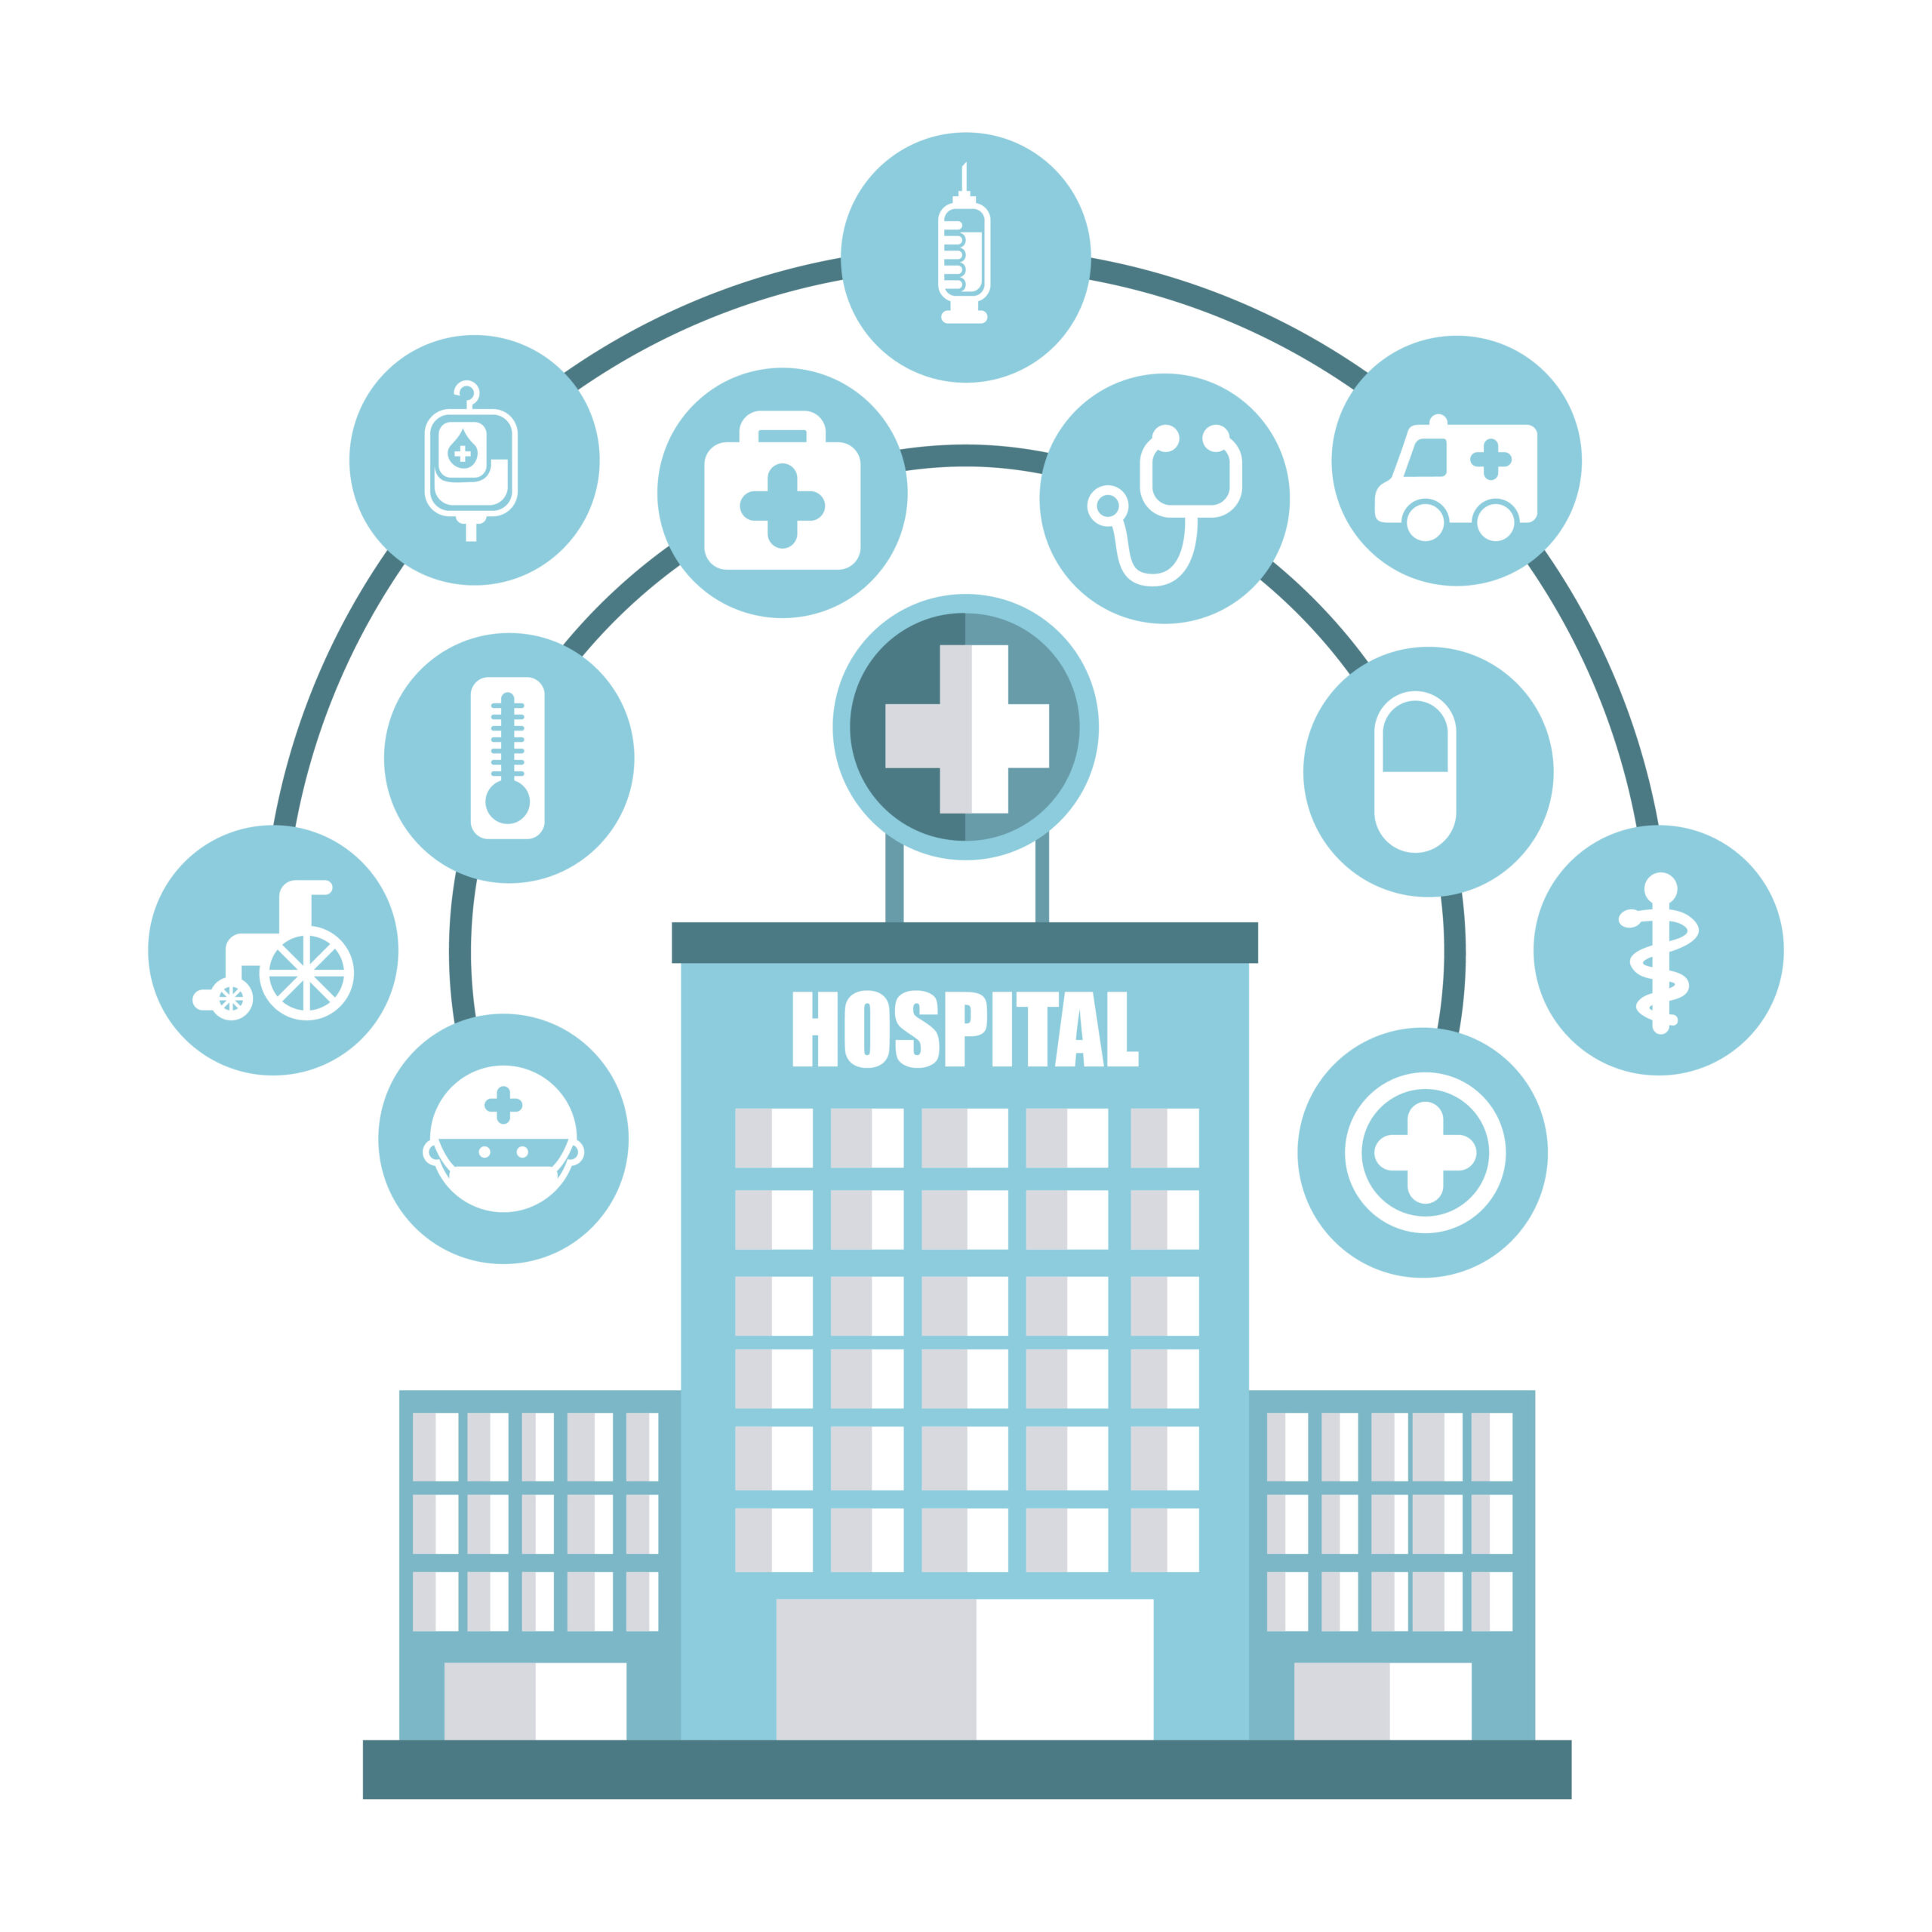 Customizable hospital management software for healthcare